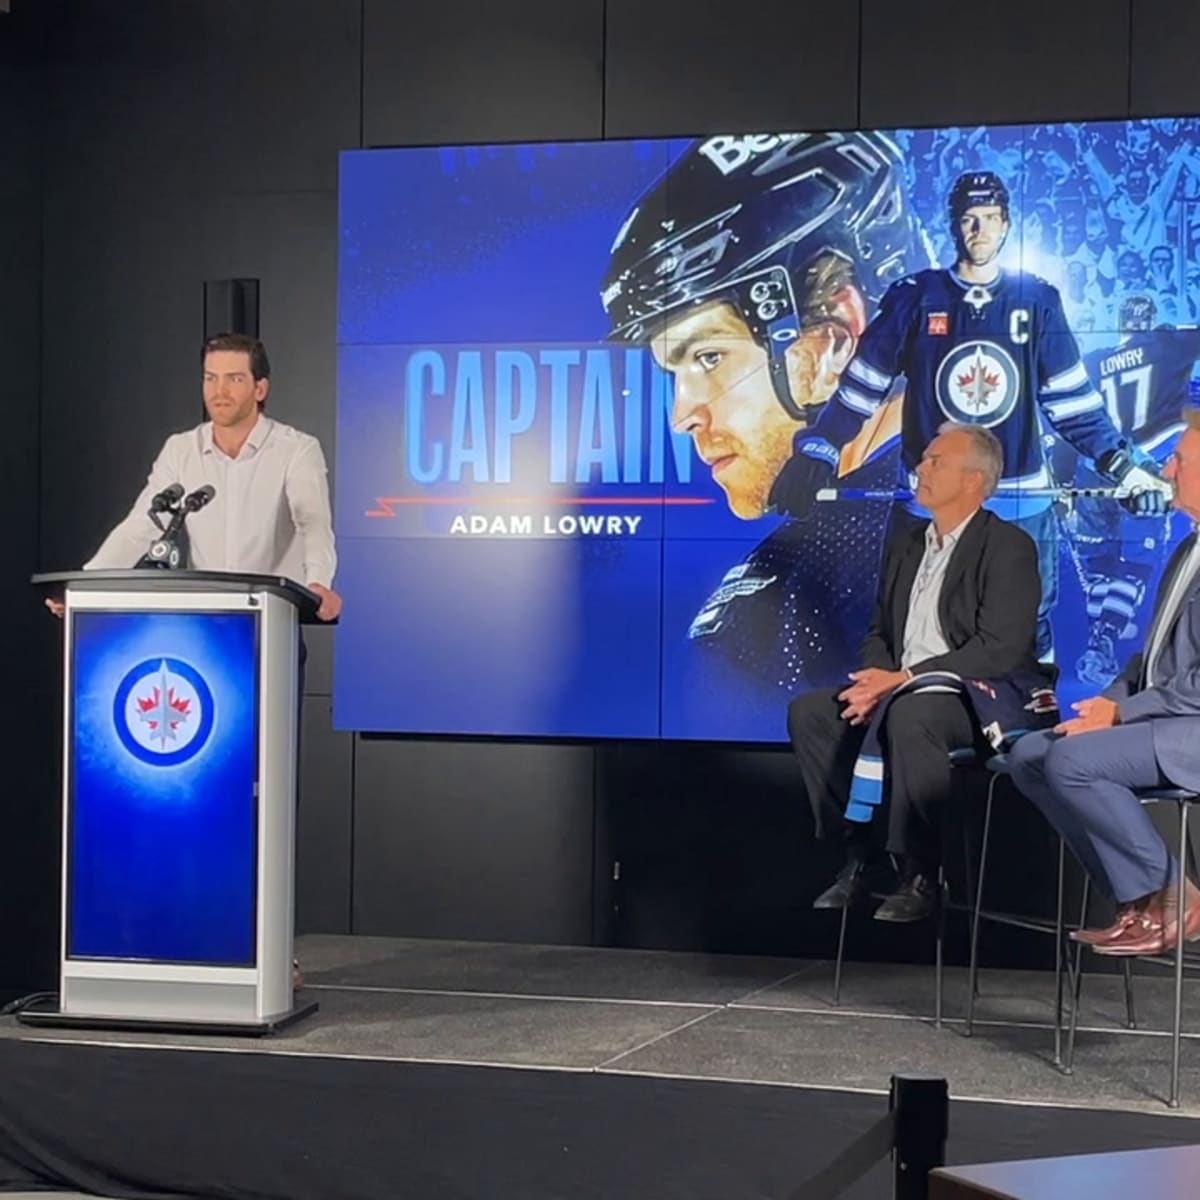 Reaction: Adam Lowry named Captain of the Winnipeg Jets - was he